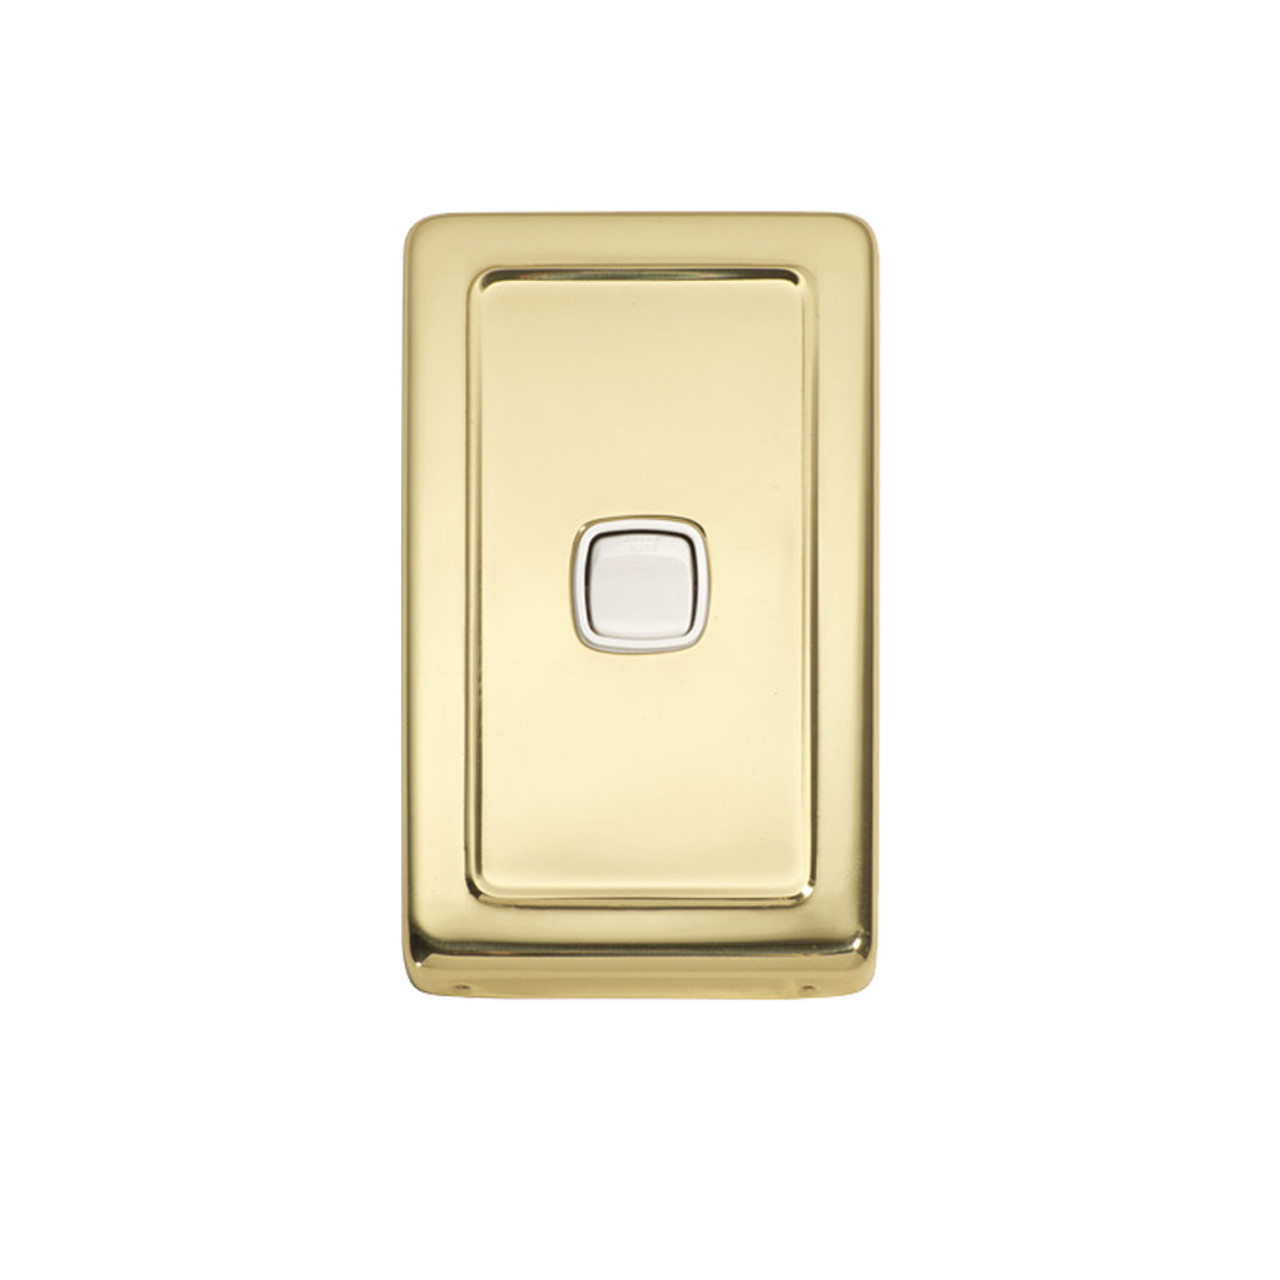 1 Gang Flat Plate Heritage Light Switch - Polished Brass Plate with White Rocker - 5852